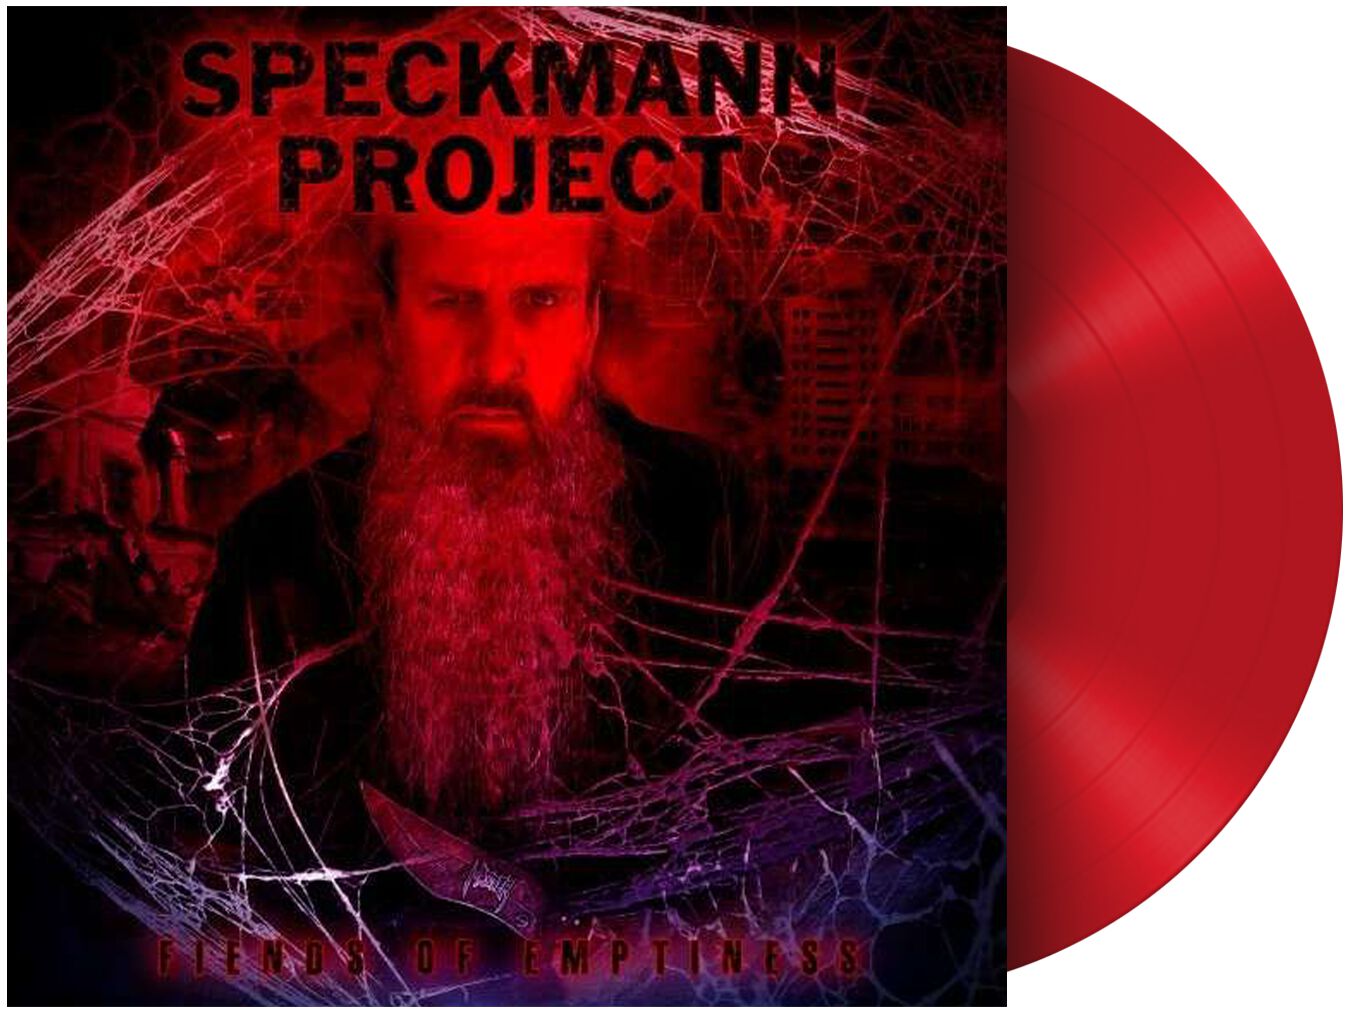 Image of Speckmann Project Friends of emptiness LP Standard